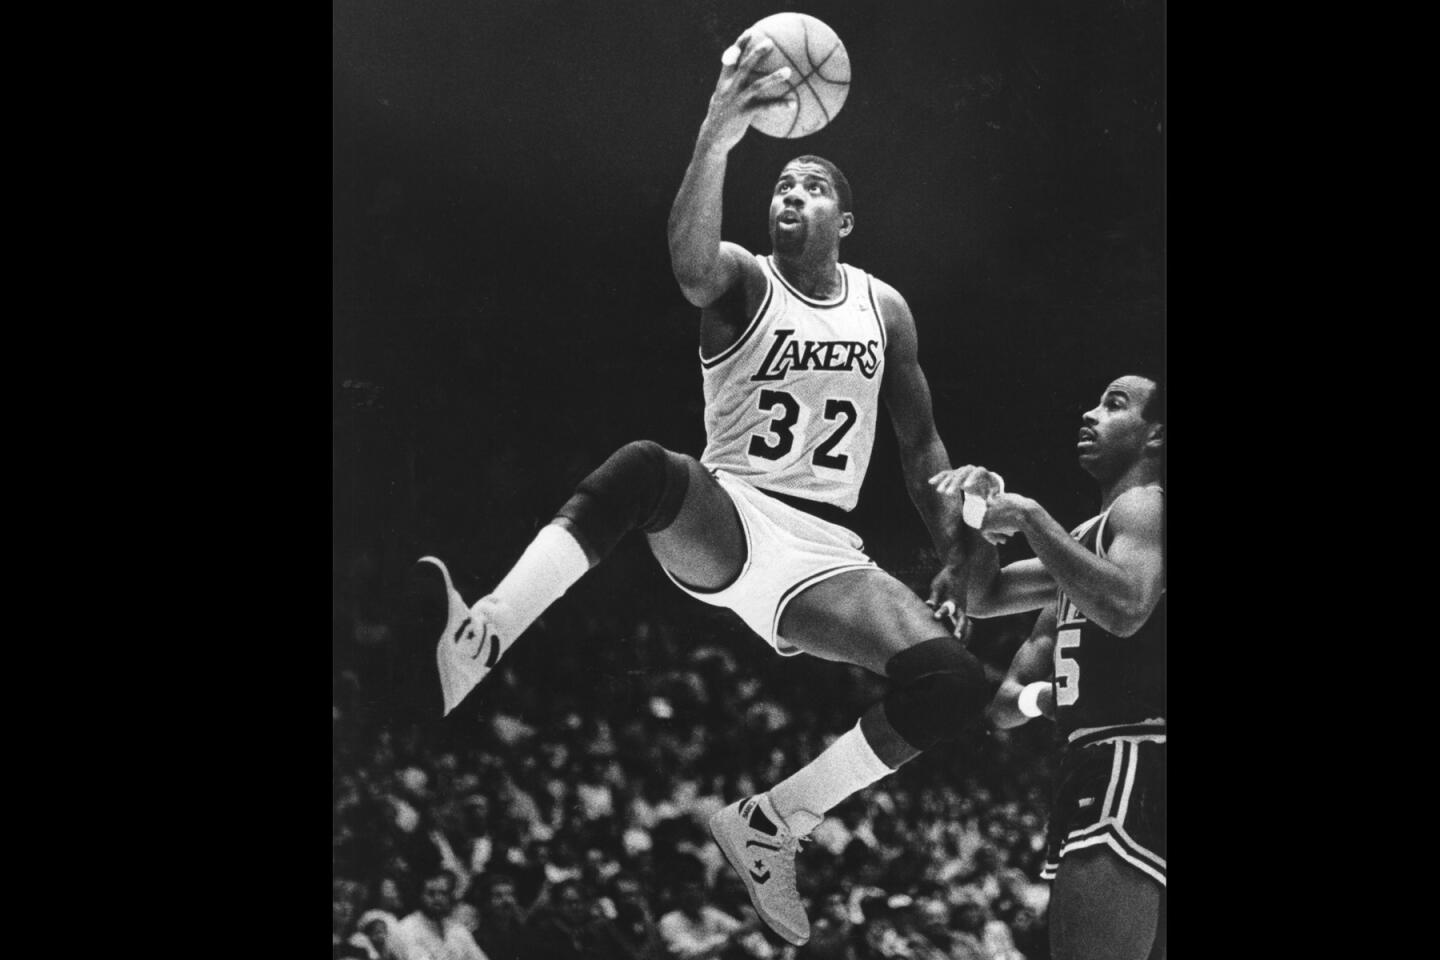 Hall of Famer Earvin "Magic" Johnson led the Lakers to five NBA titles before his shocking retirement due to HIV. After his retirement, Johnson continued to have an active role in L.A. sports and beyond.